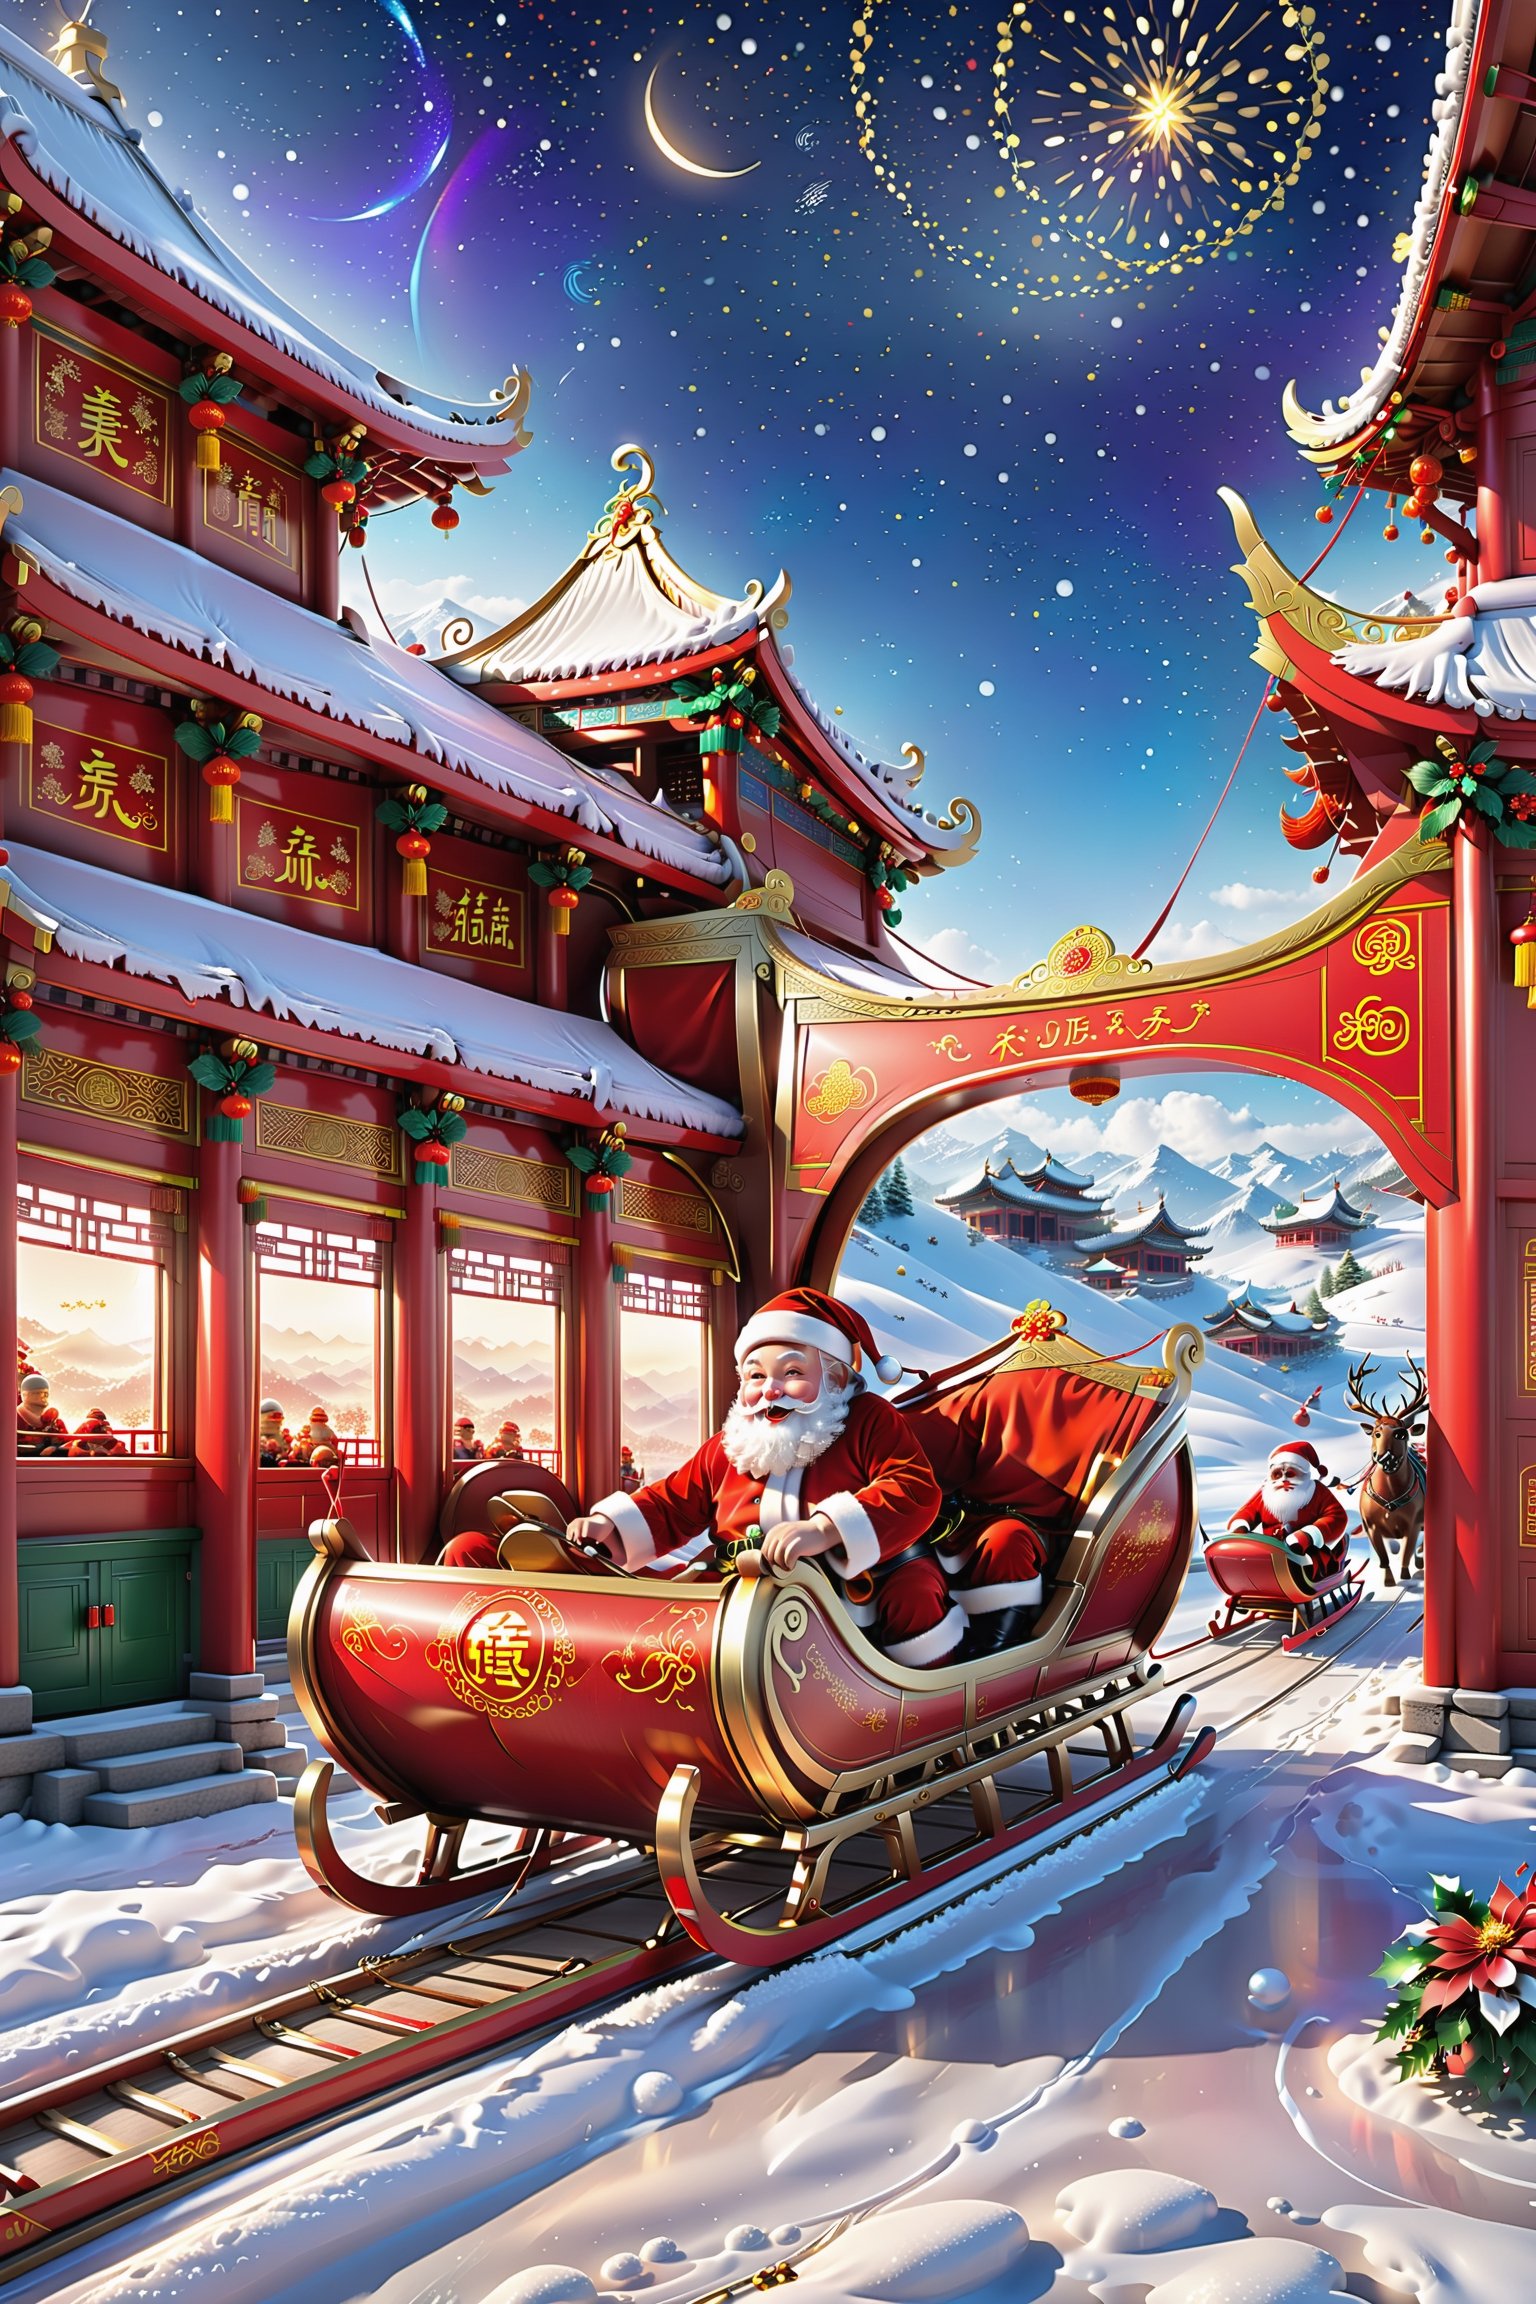 In this scene, {(((Santa Claus drives a Chinese-style sleigh car)))}, giving people a cozy feeling of blending tradition and modernity. The exterior design of the sleigh wagon incorporates Chinese elements, highlighting the unique charm of traditional Chinese culture.

The body of the sleigh car is in elegant red color, which is painted with delicate traditional Chinese patterns, such as flowers, birds, fishes and insects, as well as some words meaning good luck, such as fortune, longevity and happiness. The edges of the wheels may be decorated with traditional handicrafts such as Chinese knots, adding a strong traditional Chinese atmosphere to the whole sleigh.

The roof of the vehicle is adorned with colored lights, and these lights emit a warm glow that makes the sleigh look extra sparkling at night. Around the vehicle there are some small snowflakes, which fall on the sleigh like light silk, adding color to the whole picture.

In the driver's seat of the sleigh, Santa Claus is dressed in a traditional red Chinese robe, holding a steering stick decorated with red silk thread and golden jade. With a kind smile on his face, he seems to be the embodiment of a perfect combination of traditional culture and modern festivities, sailing towards every child expecting Christmas gifts. The whole scene presents a unique blend of classical Chinese beauty and Christmas harmony.
The body is adorned with LED lights that create a bright pattern that resembles a twinkling star. The wheels are adorned with glowing decorations, creating a fantastic atmosphere. The propulsion device at the bottom of the sled car is also a masterpiece of modern technology, probably some levitation technology or a magnetic suspension system, which makes the sled glide lightly over the snow as if it were free from any resistance.

At the front of the vehicle is a transparent cockpit, allowing one to see Santa Claus sitting in a comfortable driver's seat, with his hands on a futuristic steering wheel, controlling the direction of the sleigh. There may also be some high-tech displays in the cockpit showing navigation information, gift lists or a countdown to Christmas.

Throughout the scene, the sleigh car speeds through the silvered Christmas night, leaving a sparkling track of light, like a messenger from the future world descending on this peaceful holiday night.